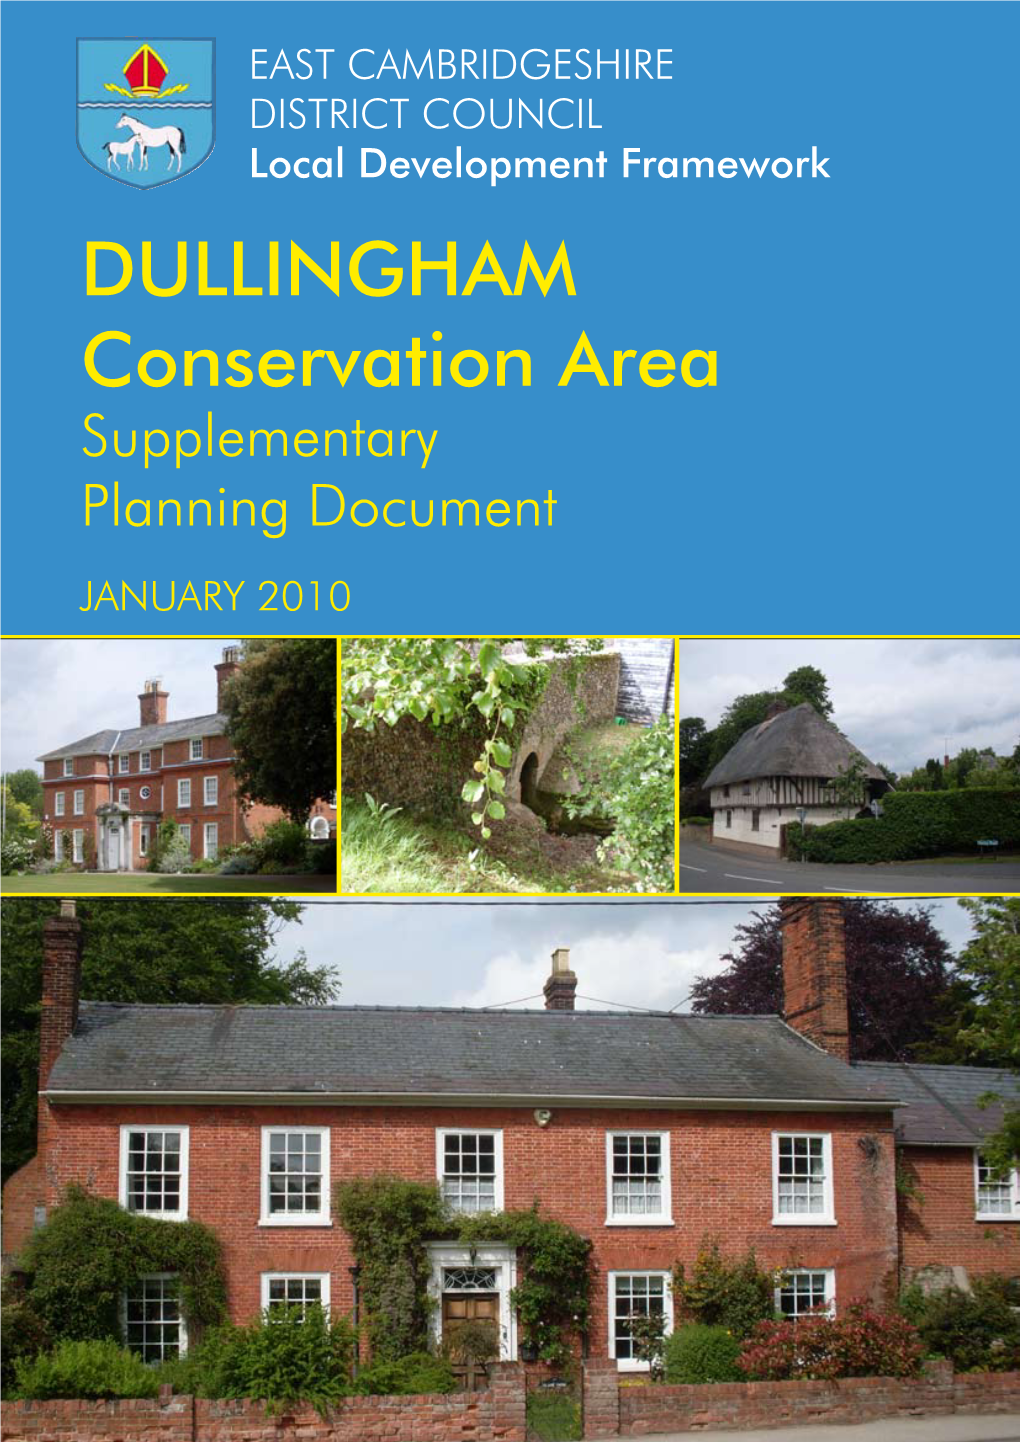 DULLINGHAM Conservation Area Supplementary Planning Document JANUARY 2010 1 Introduction P.2